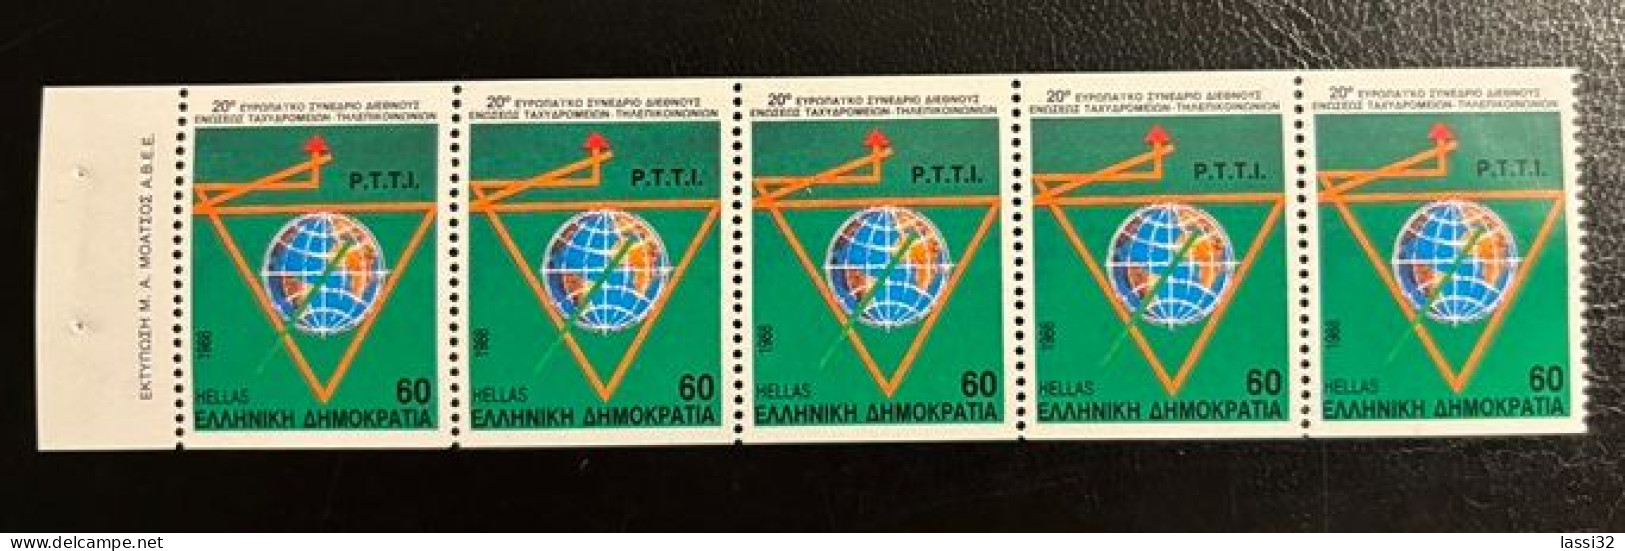 GREECE, 1988, P.T.T.I. CONFERENCE ,  STRIP OF 5 (ONE STAMPS WITH NUMBER), HORIZONTALLY IMPERFORATE MNH - Neufs